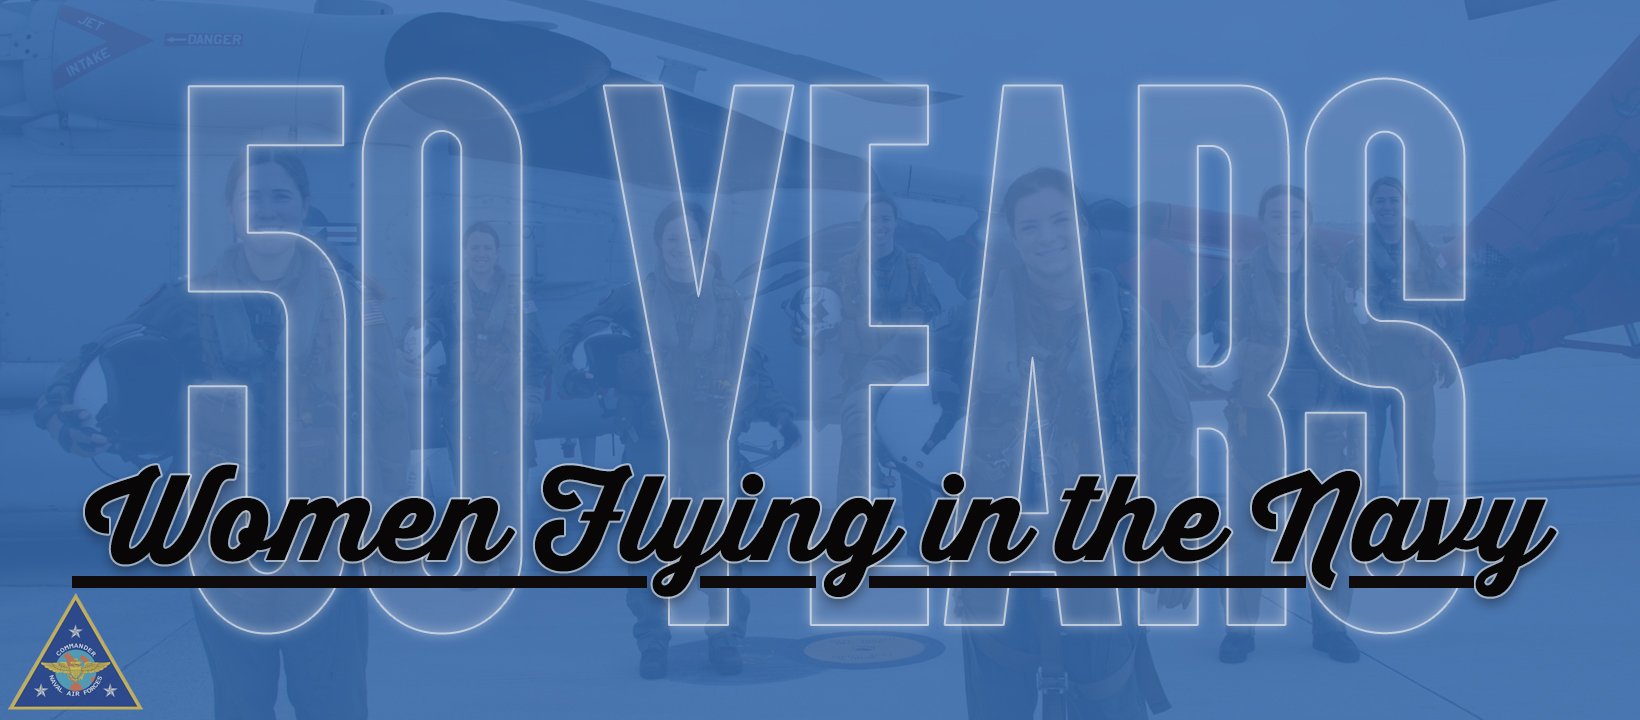 50 Years of Women Flying in the Navy graphic